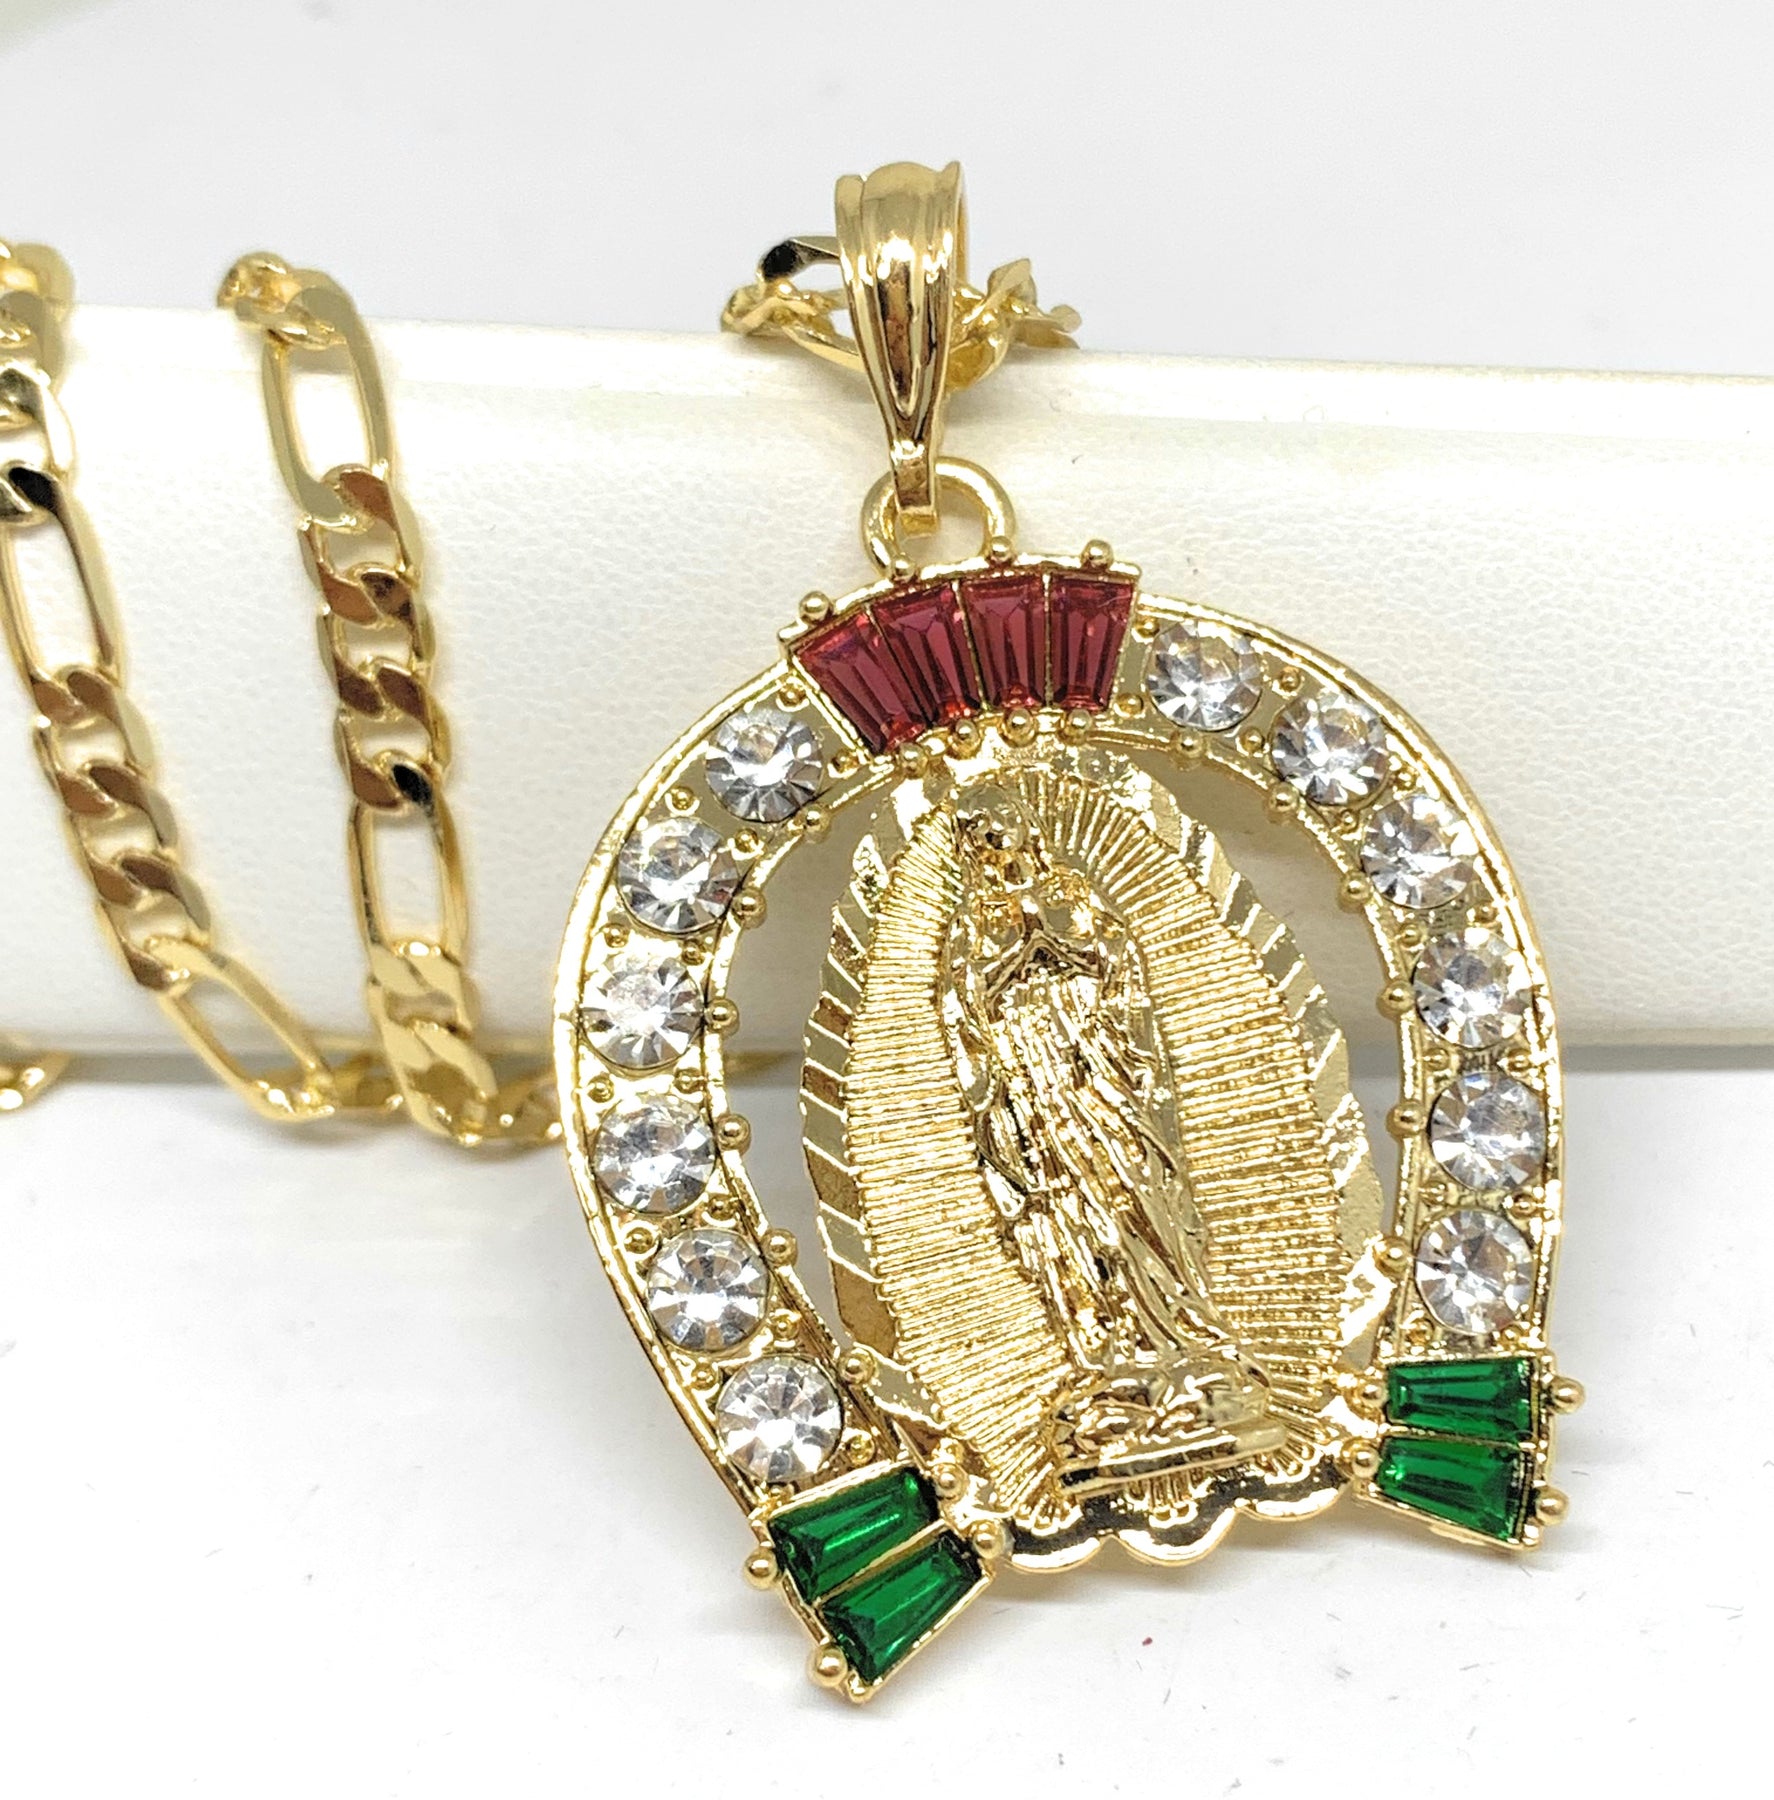 Yellow Gold Our Lady of Guadalupe Virgin Mary Pendant Necklace